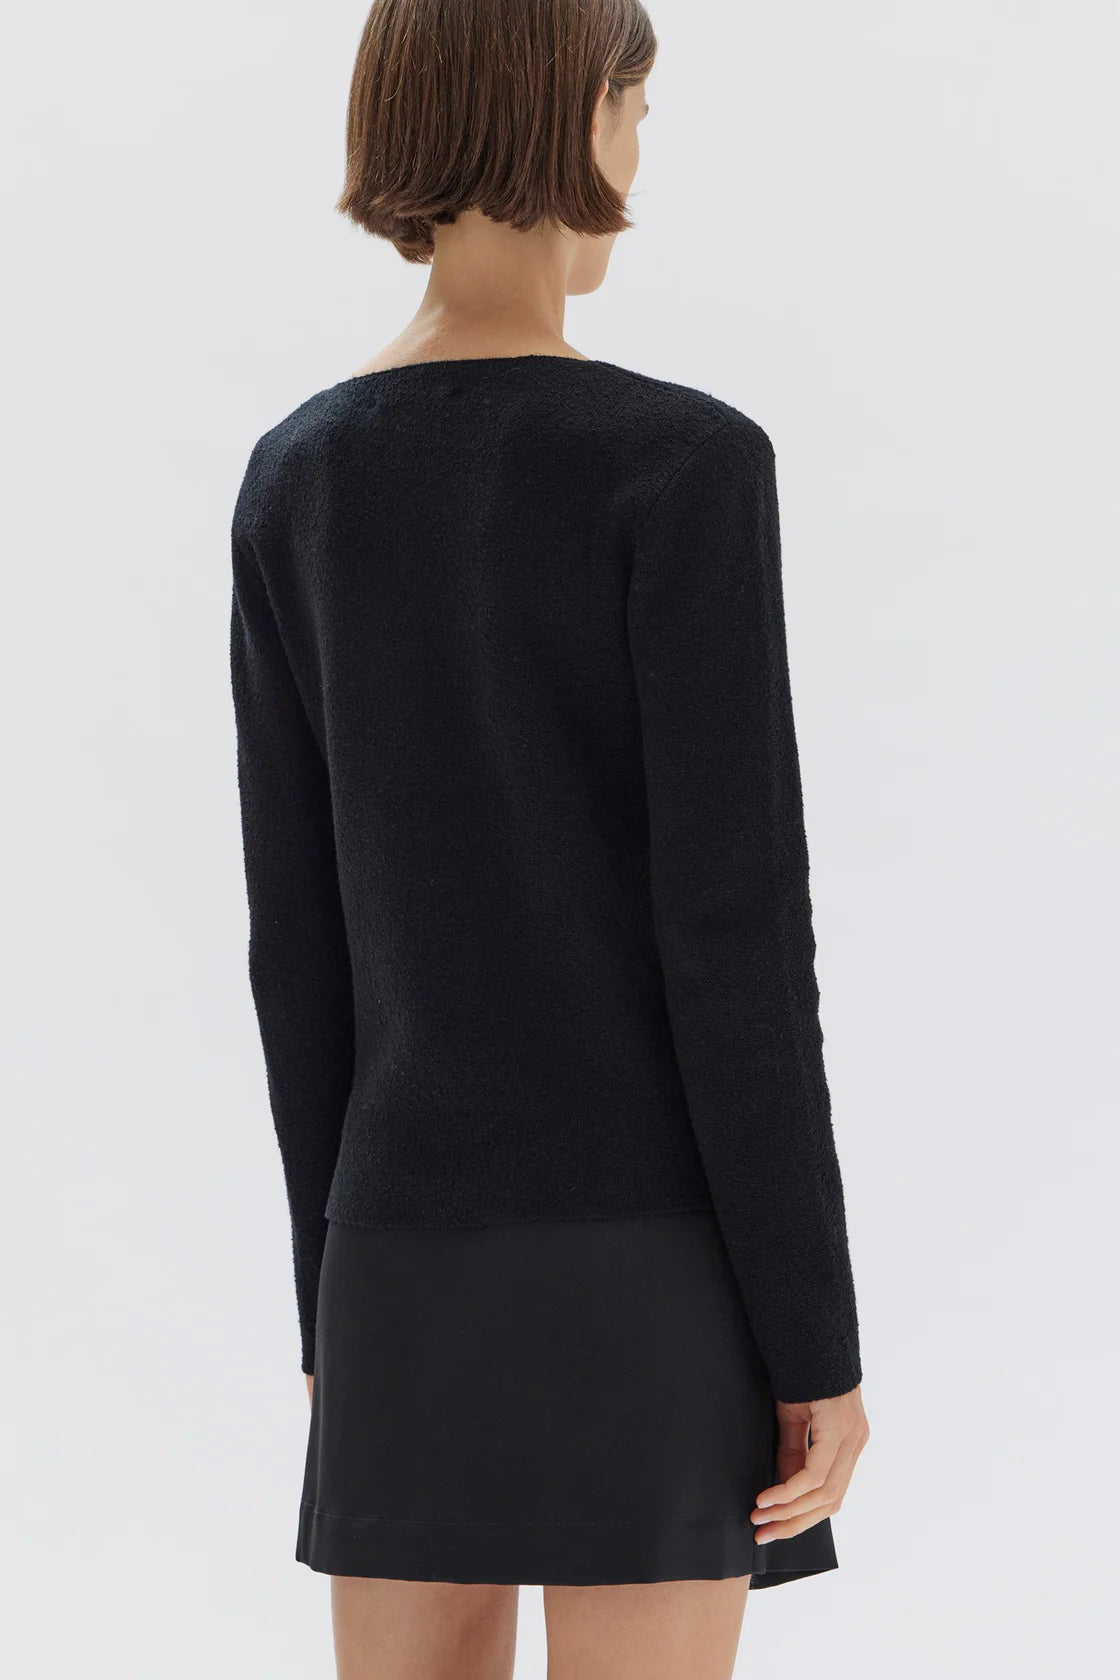 Meredith Square Neck Long Sleeve Top Black